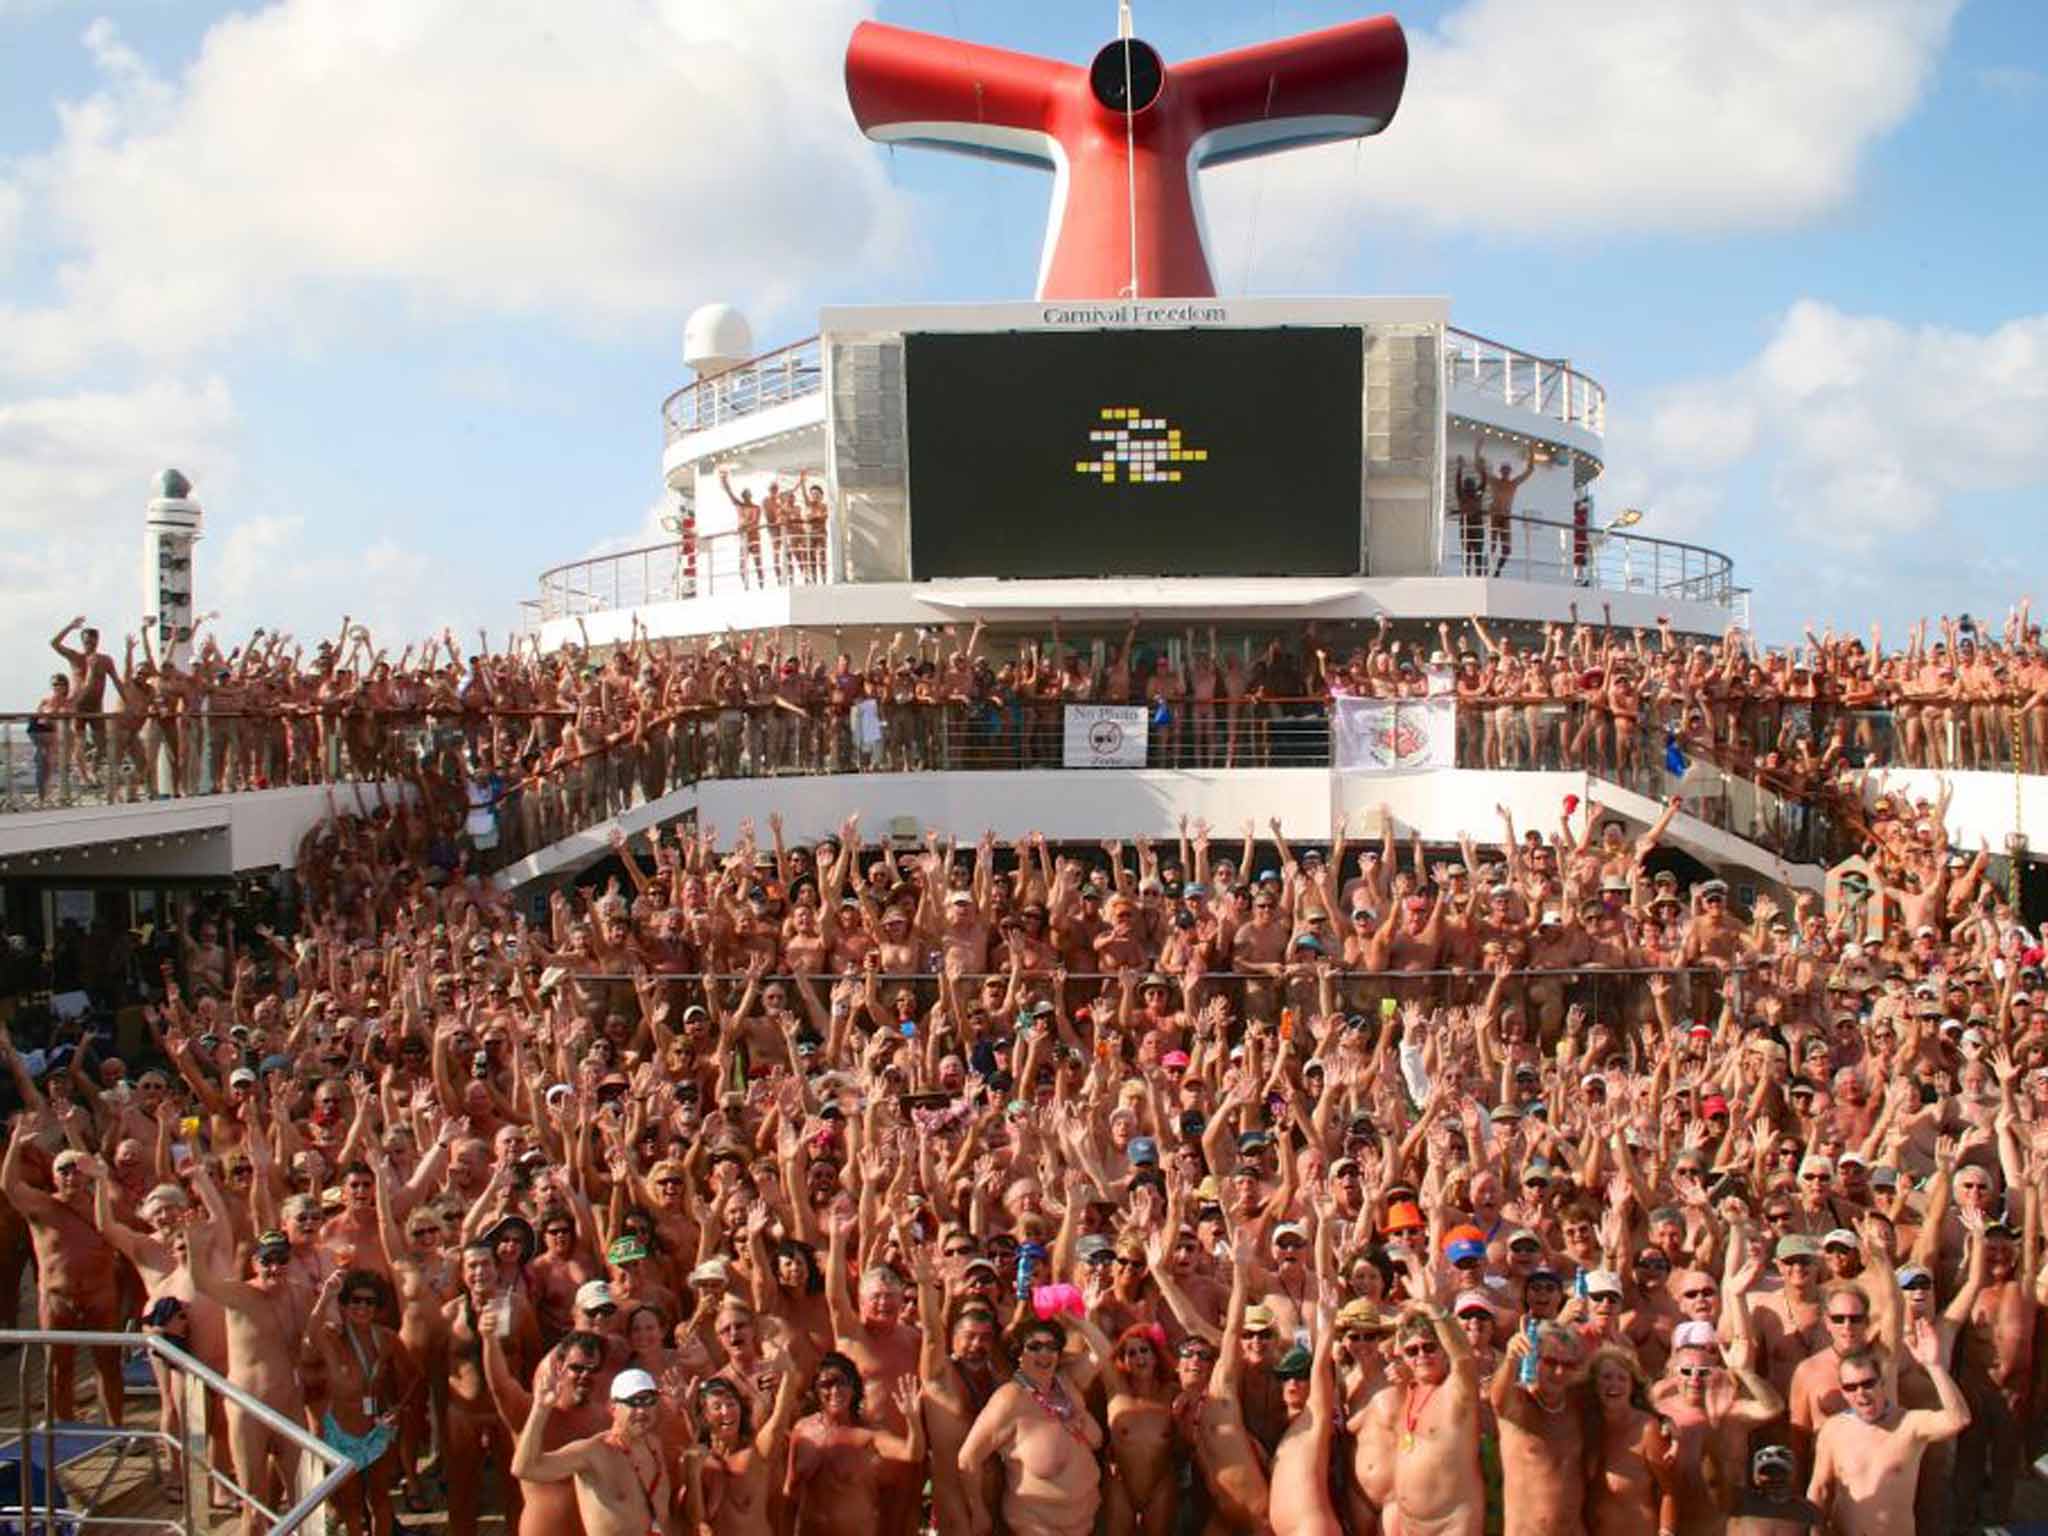 Nudist cruise ship Whats it like on a boat with 2,000 people not wearing clothes? The Independent The Independent